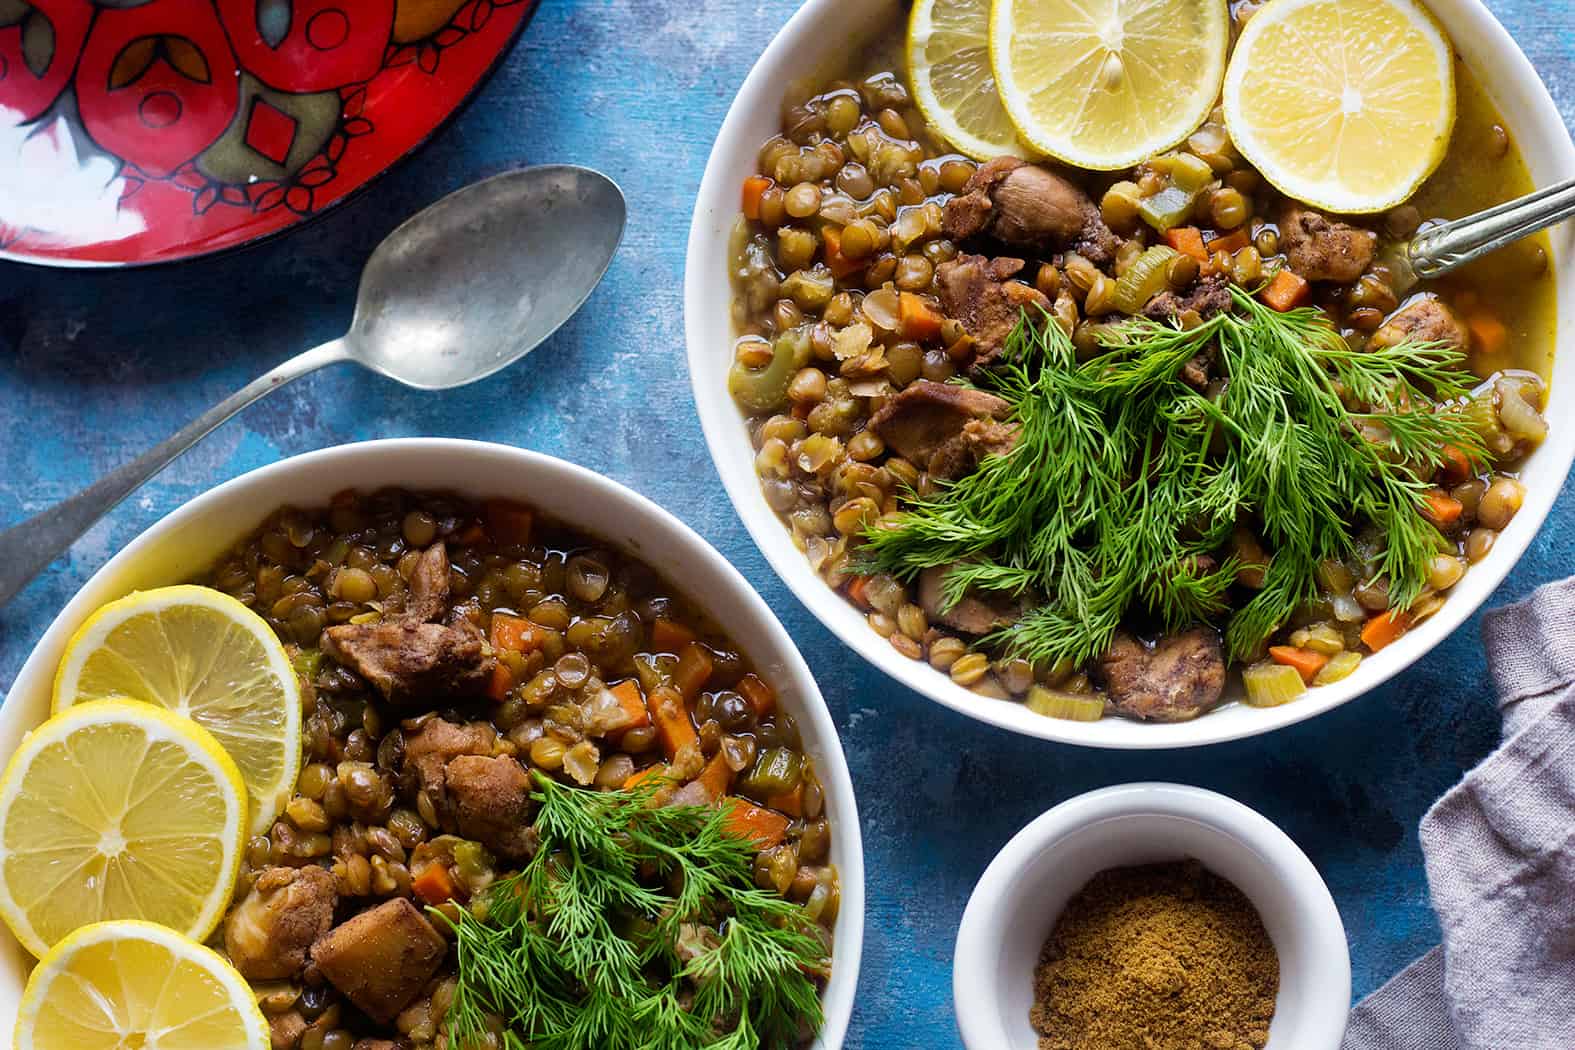 Enjoy an easy chicken lentil soup that’s full of Mediterranean flavor. Seasoned with warm spices and packed with veggies, this soup is great for dinner.